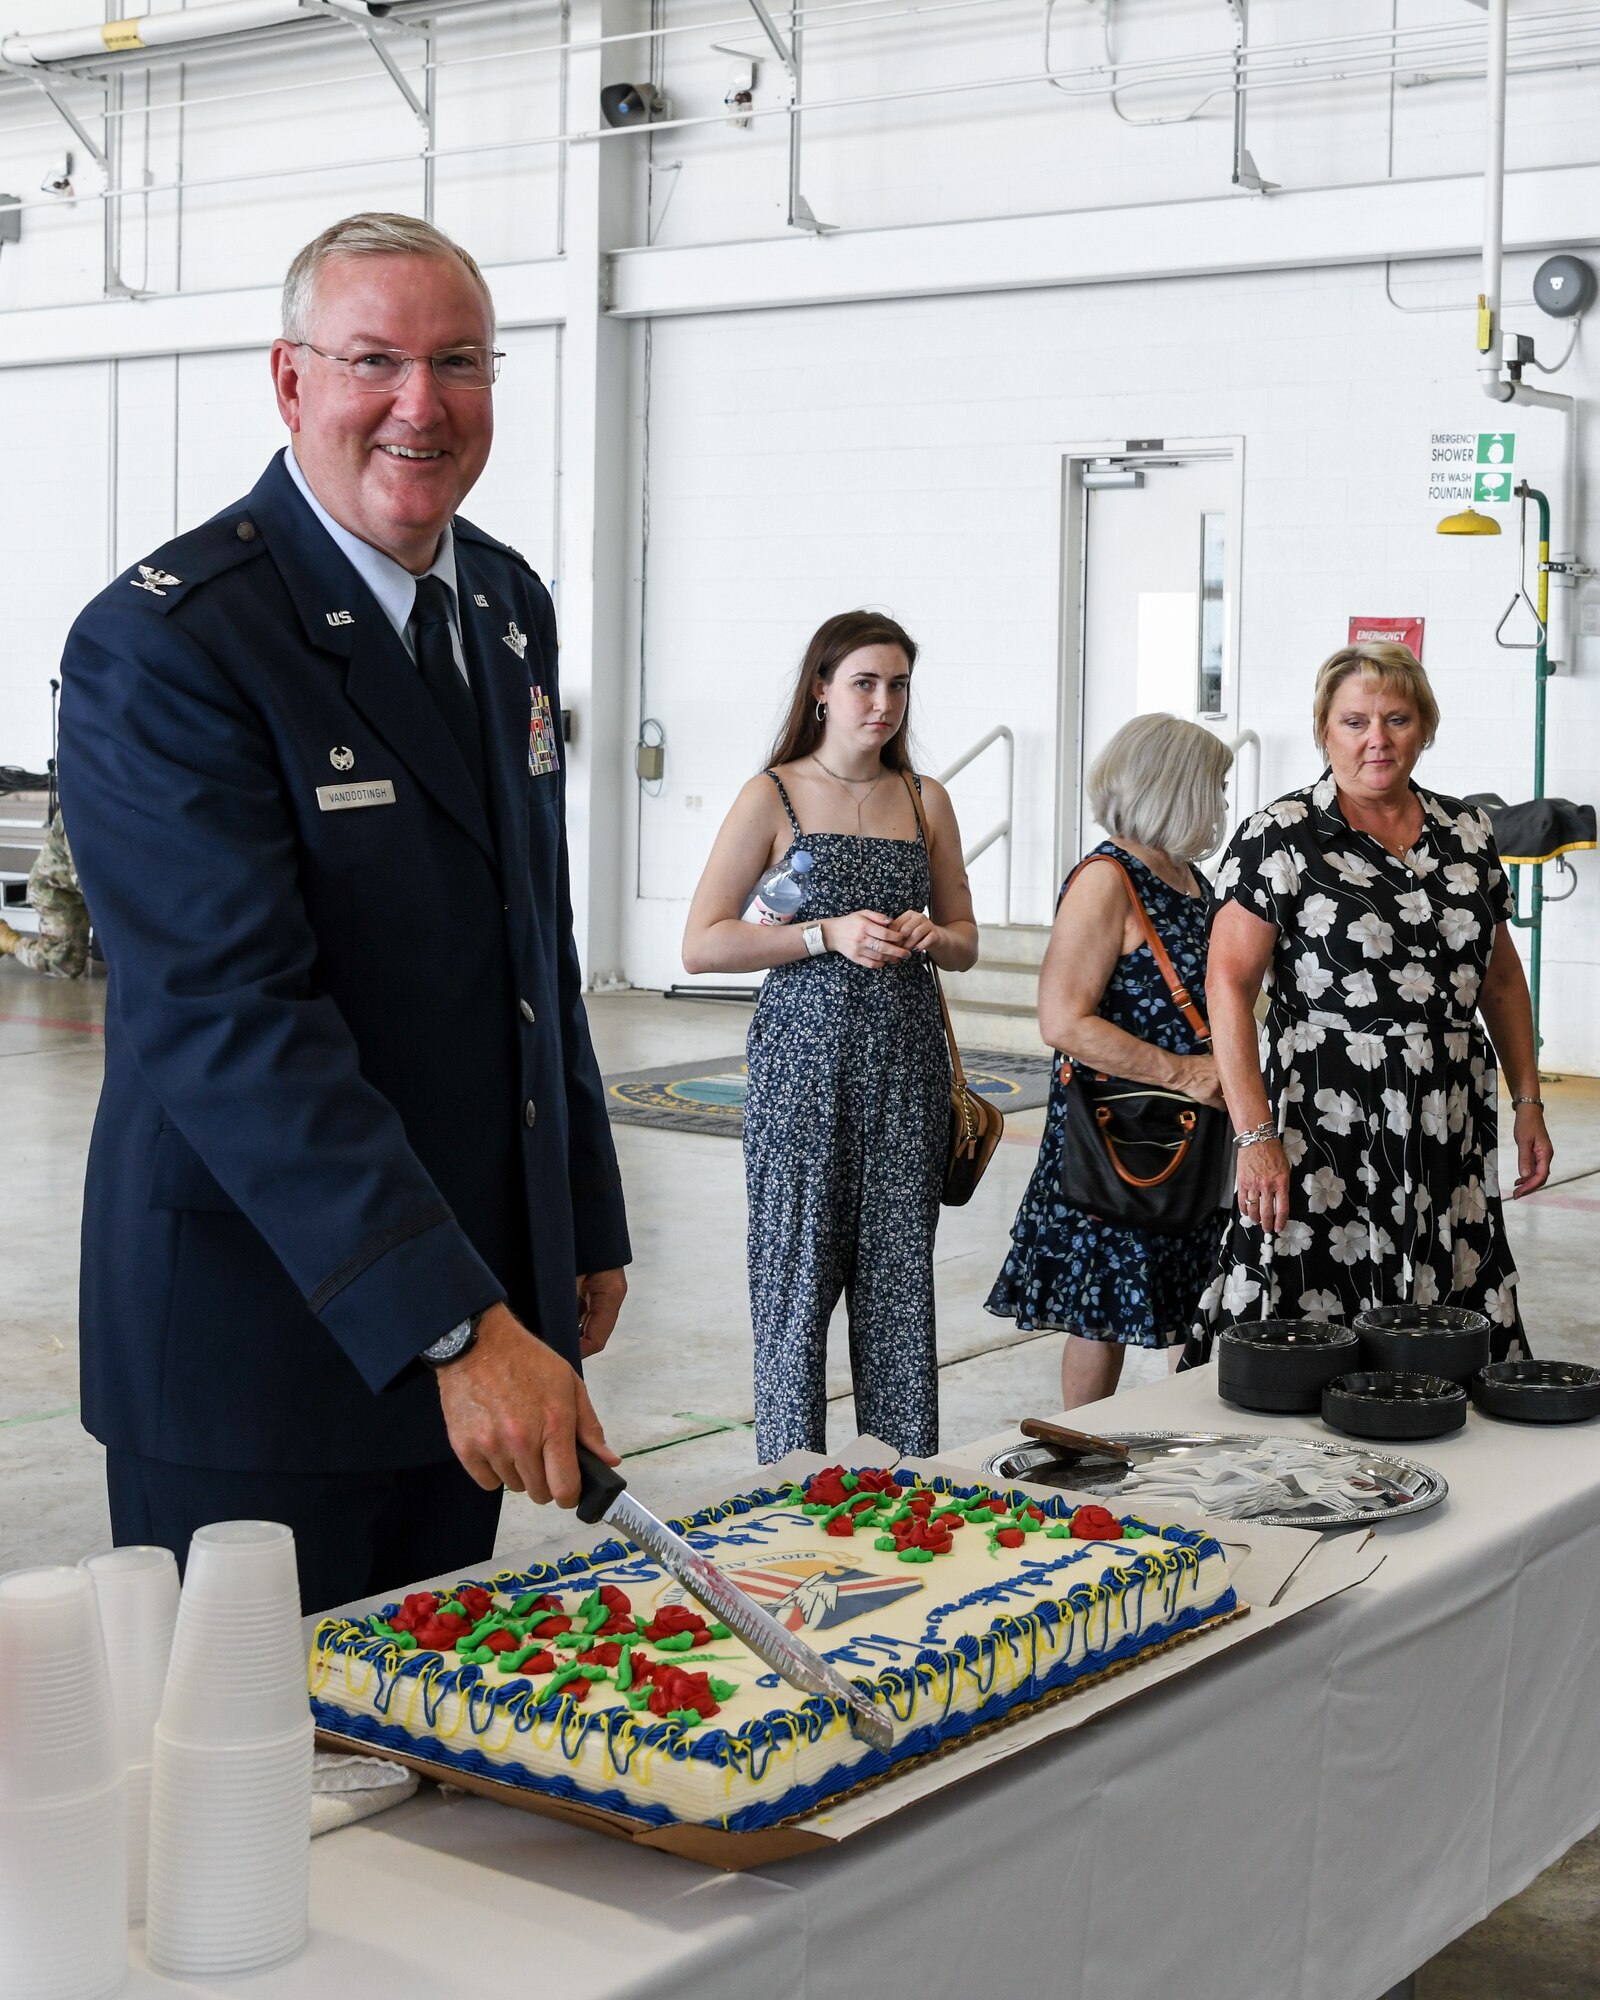 The Reserve Citizen Airmen of the 910th Airlift Wing welcomed back Col. Jeff “VD” Van Dootingh as the unit’s 28th commander during an assumption of command ceremony, June 6, 2021, at Youngstown Air Reserve Station.